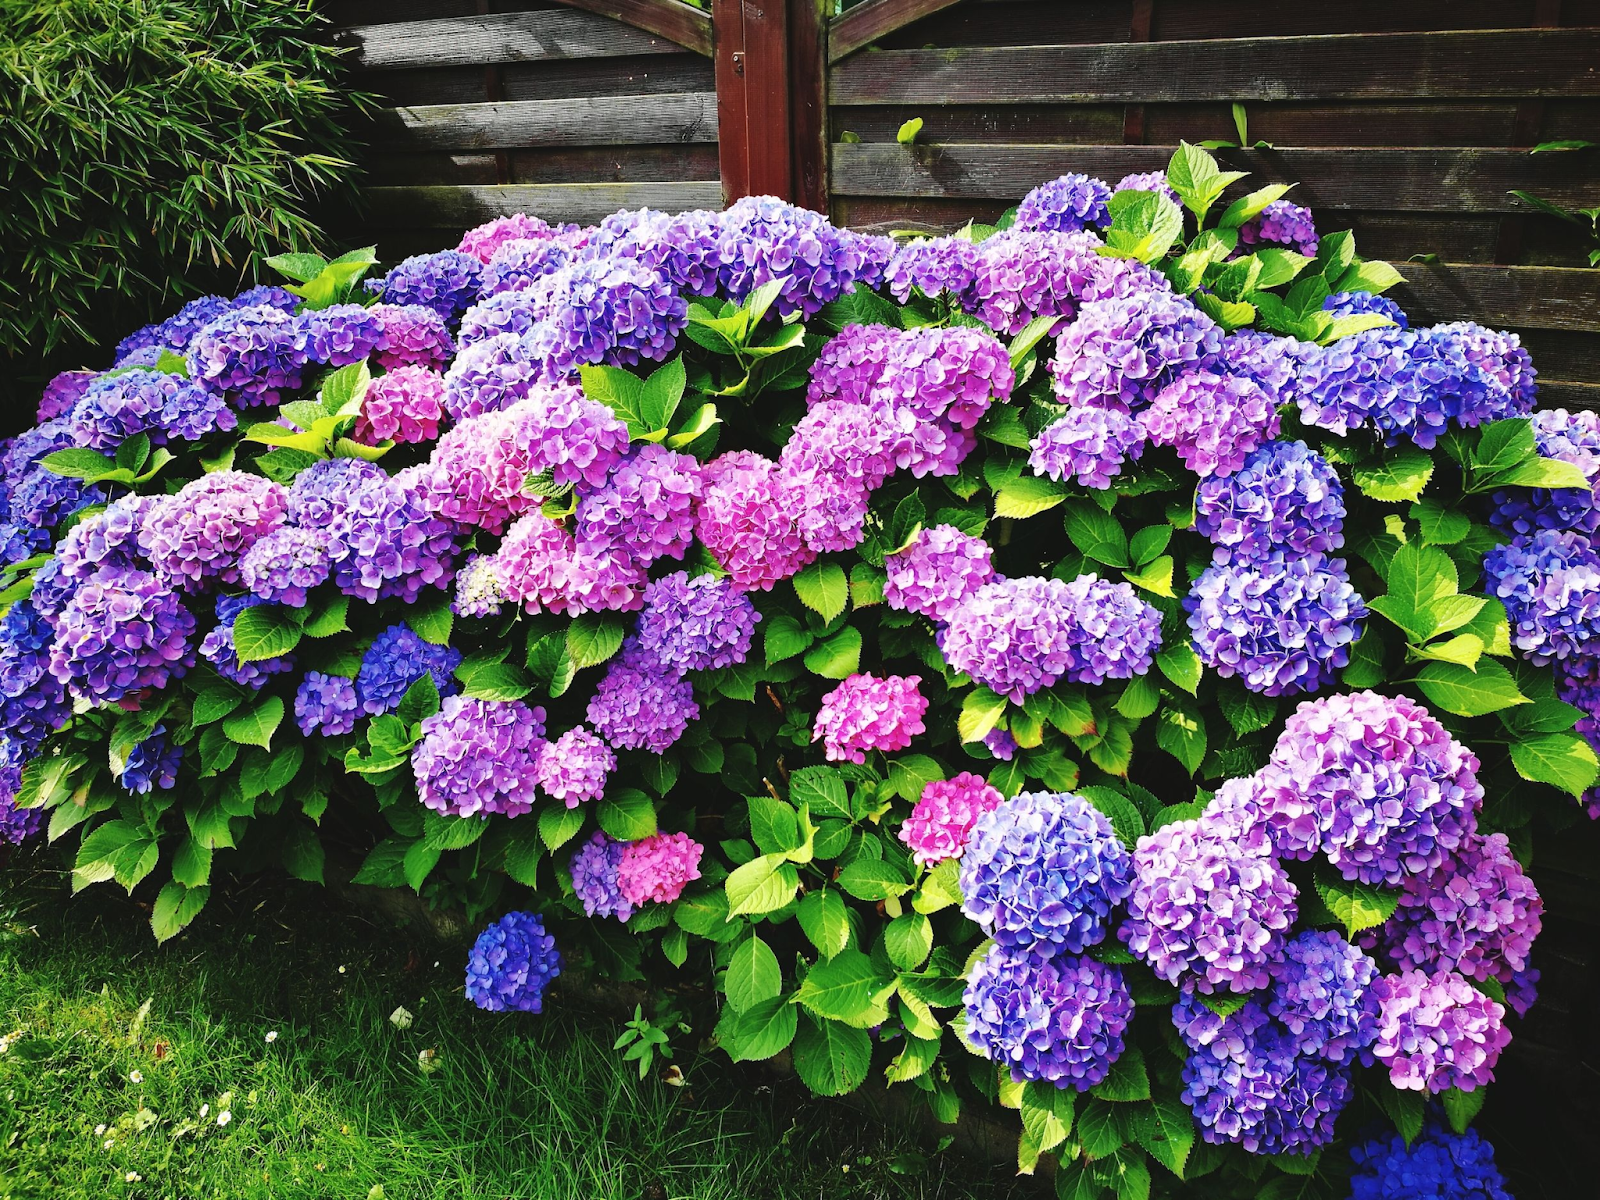 Don’t be intimidated by their look, though, as hydrangeas are quite easy to care for. They tolerate virtually any kind of soil type as long as it’s rich, fertile, and moist.